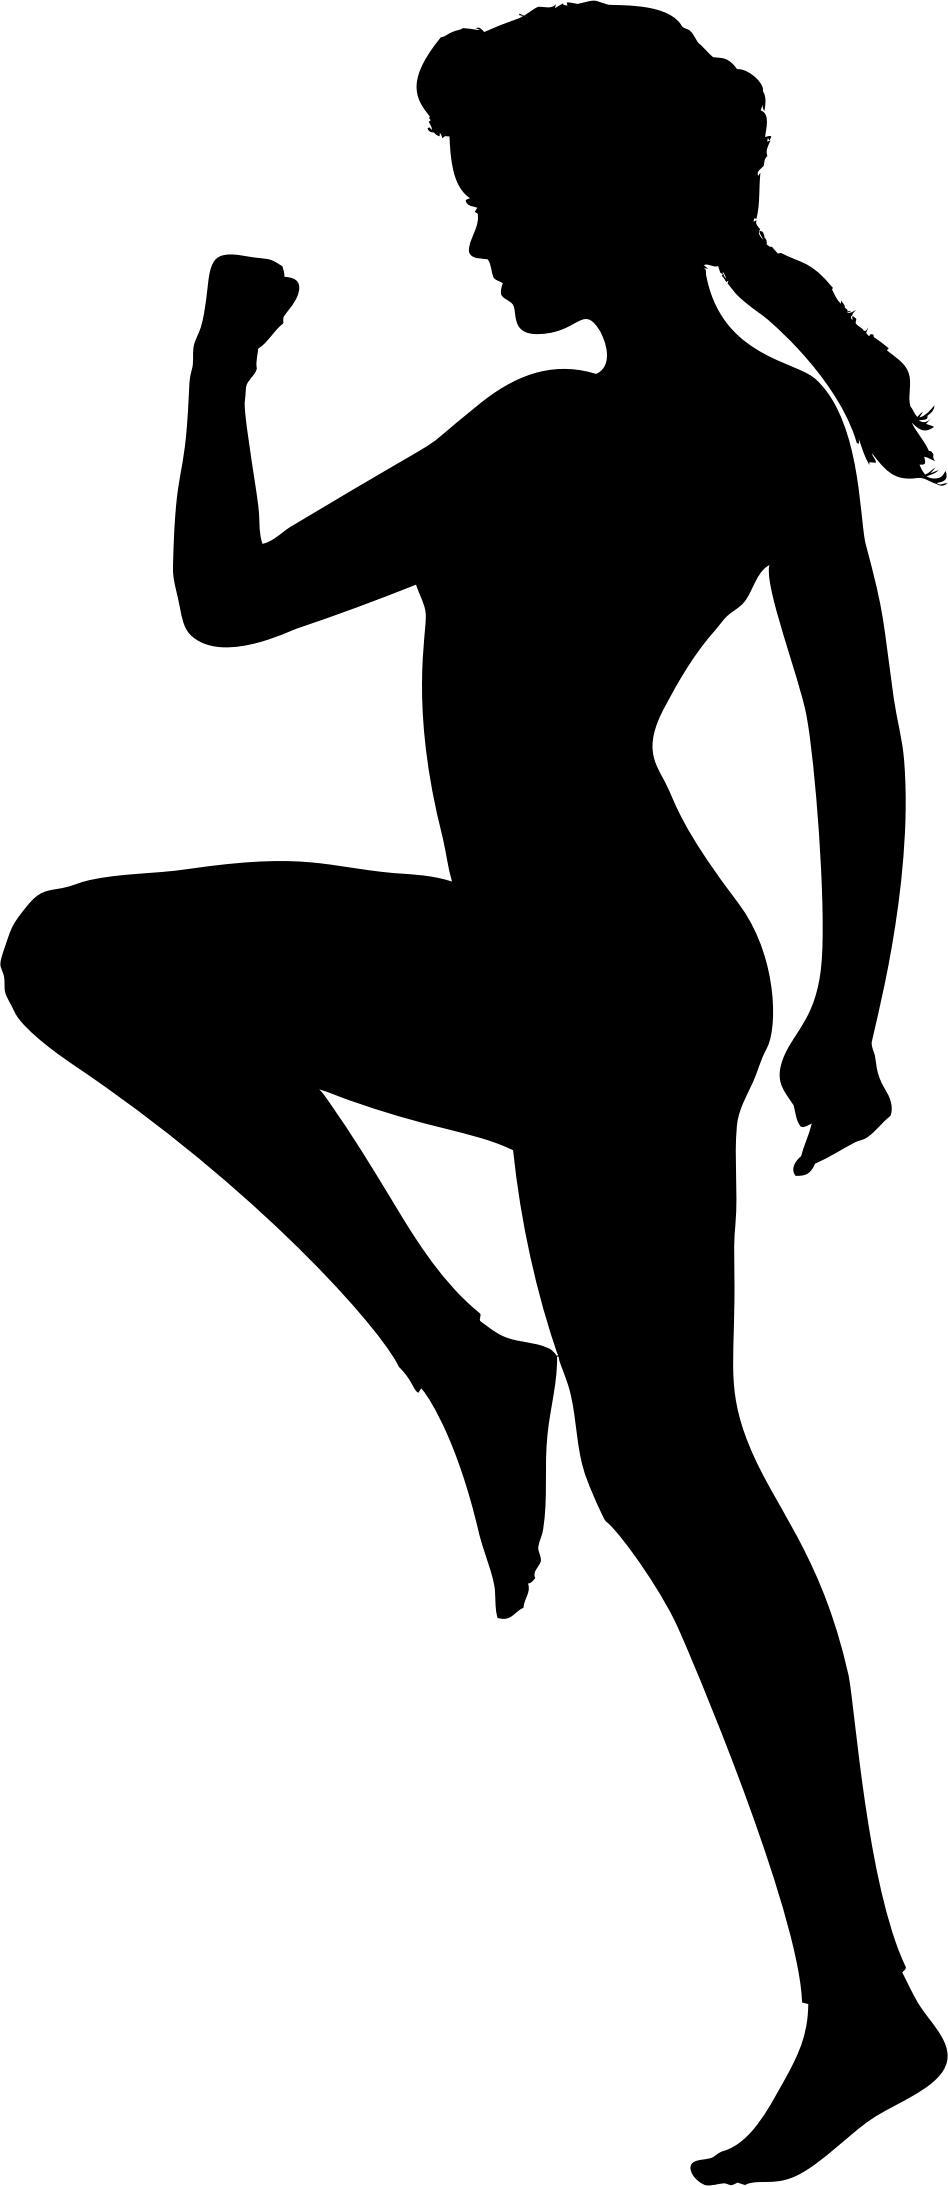 Woman Exercising Silhouette By Karen Arnold png transparent